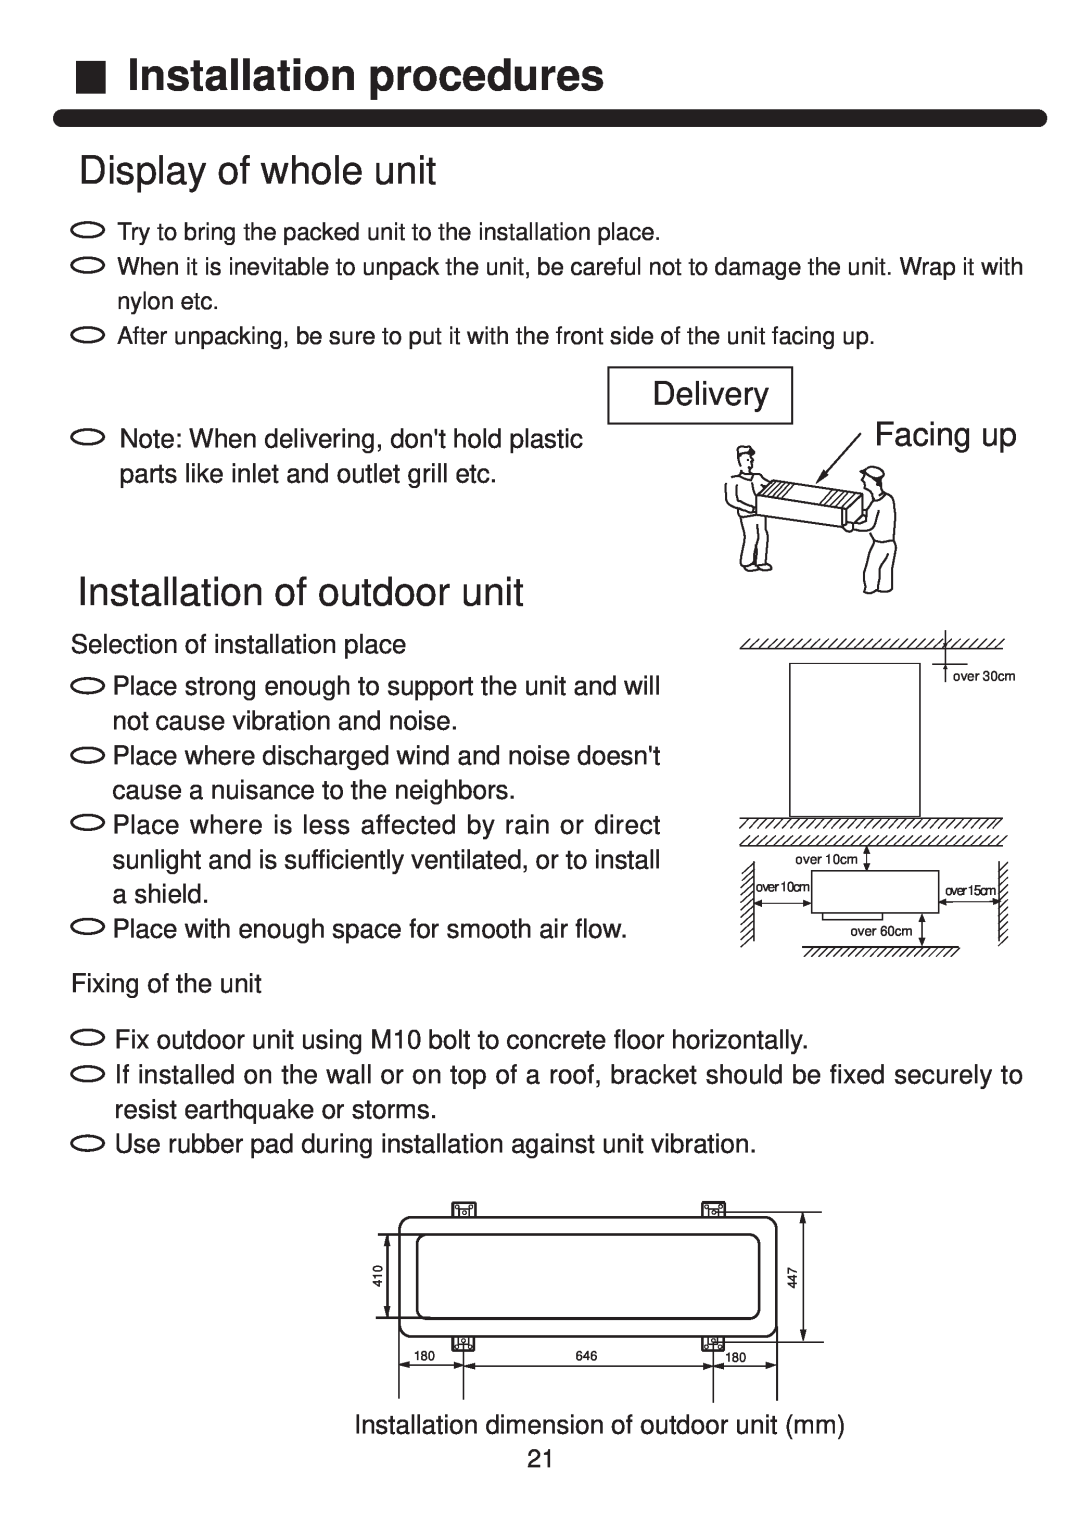 Haier HPU-42CF03 Installation procedures, Display of whole unit, Installation of outdoor unit, Delivery, Facing up 